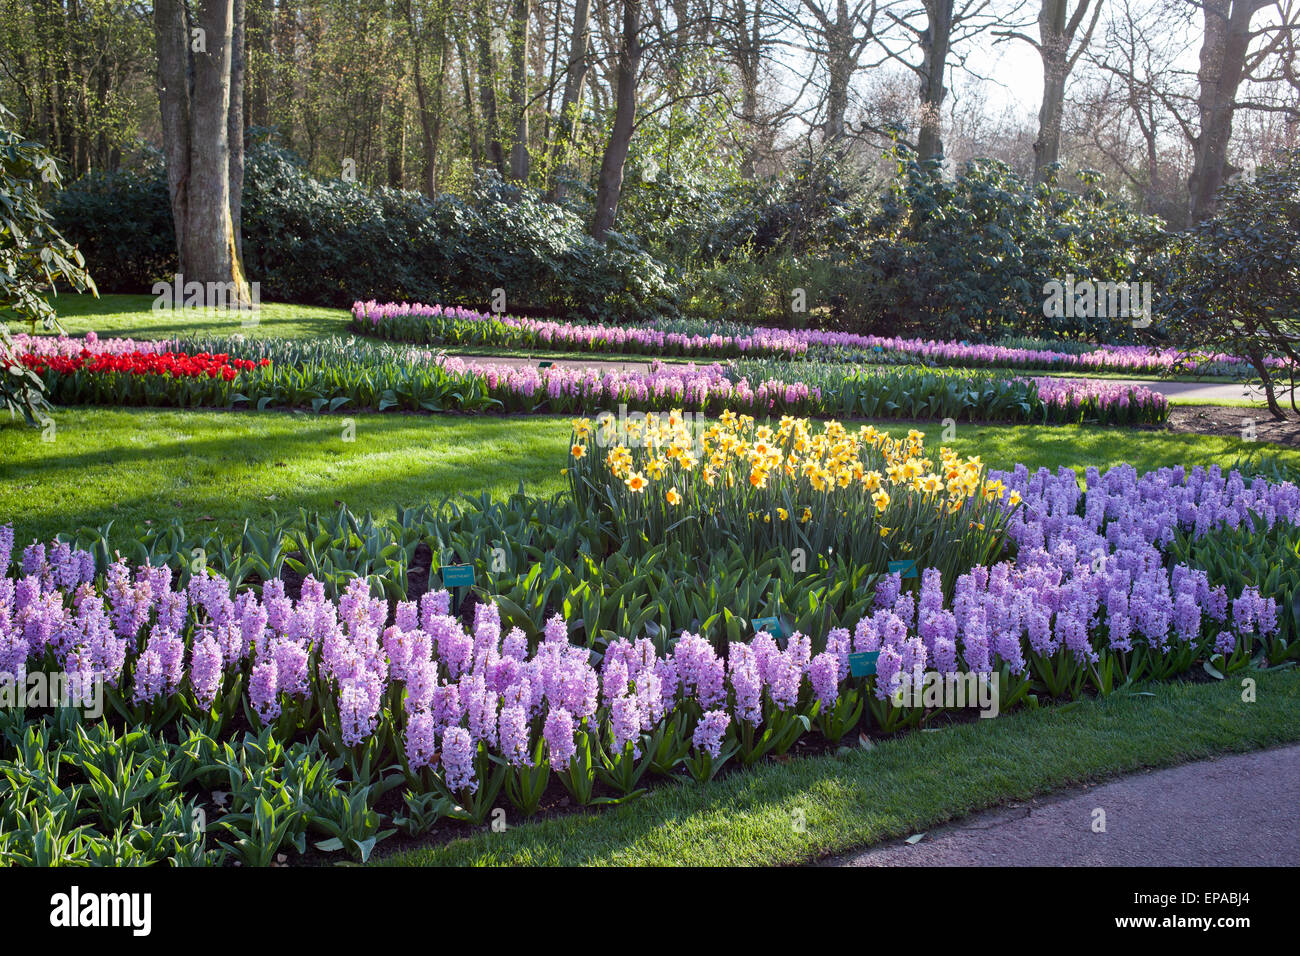 famous flowers park keukenhof in netherlands also known as the